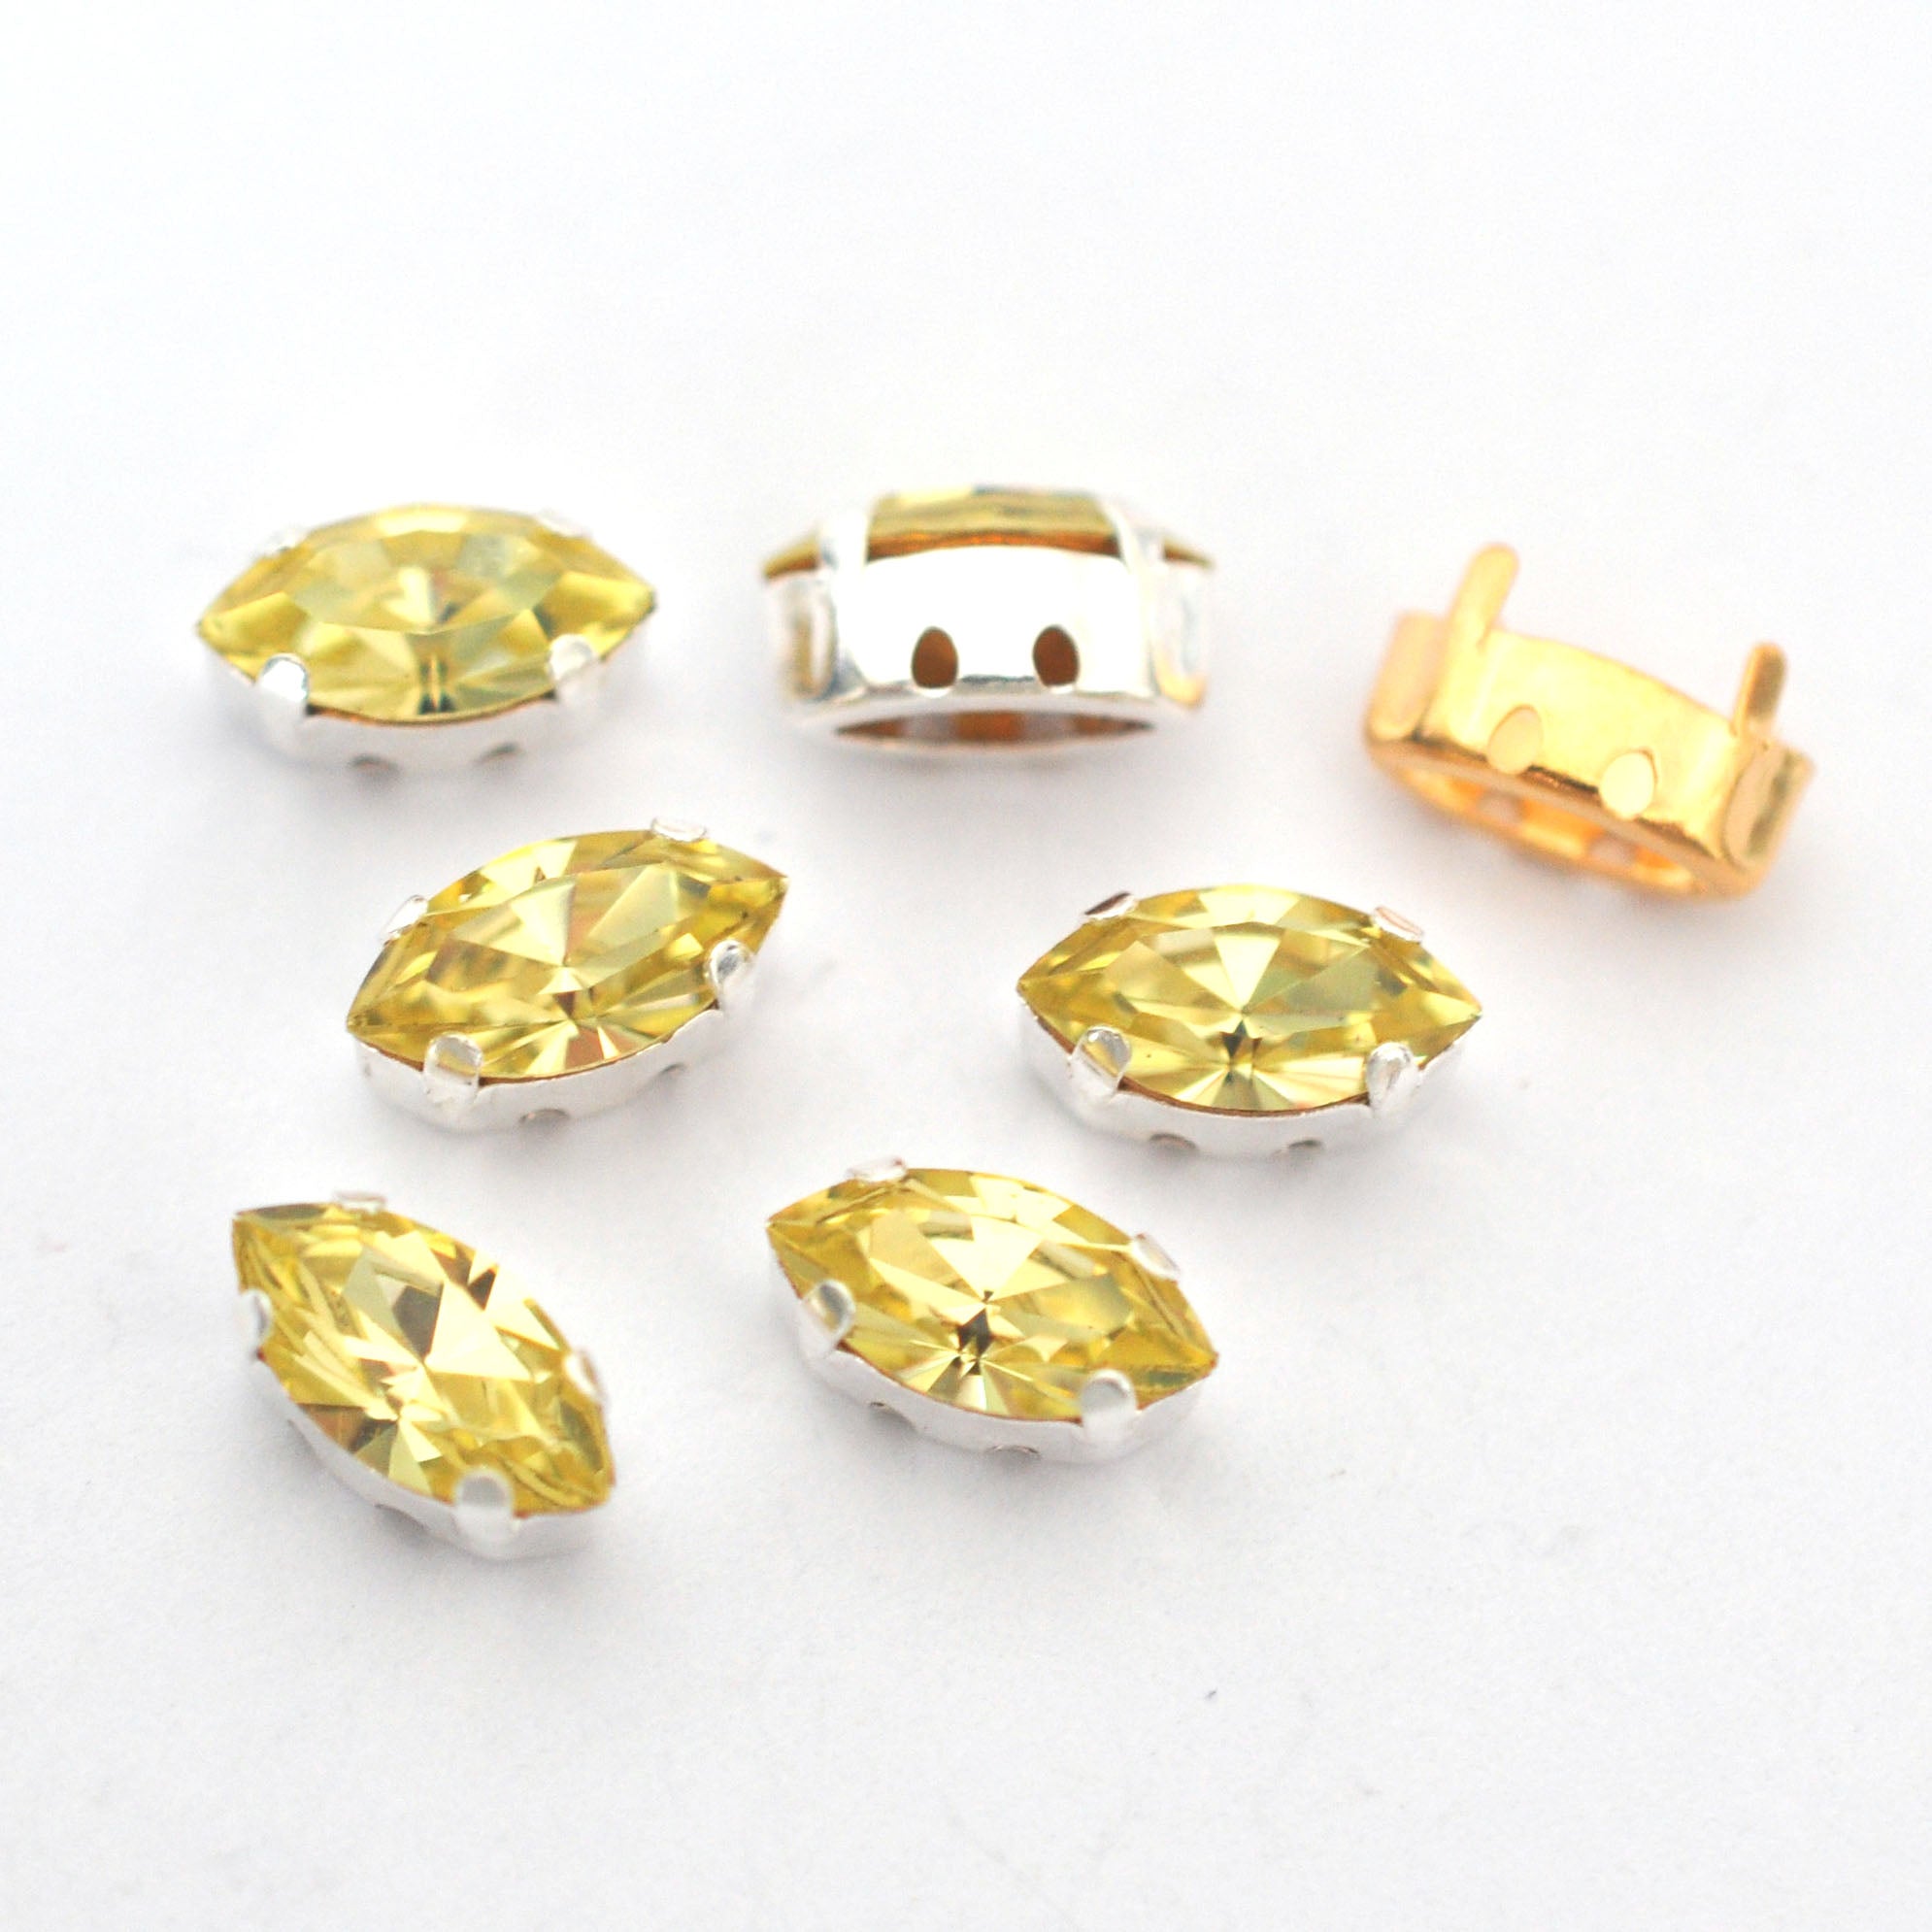 Jonquil 10x5mm Navette Sew On Crystals - 6 Pieces